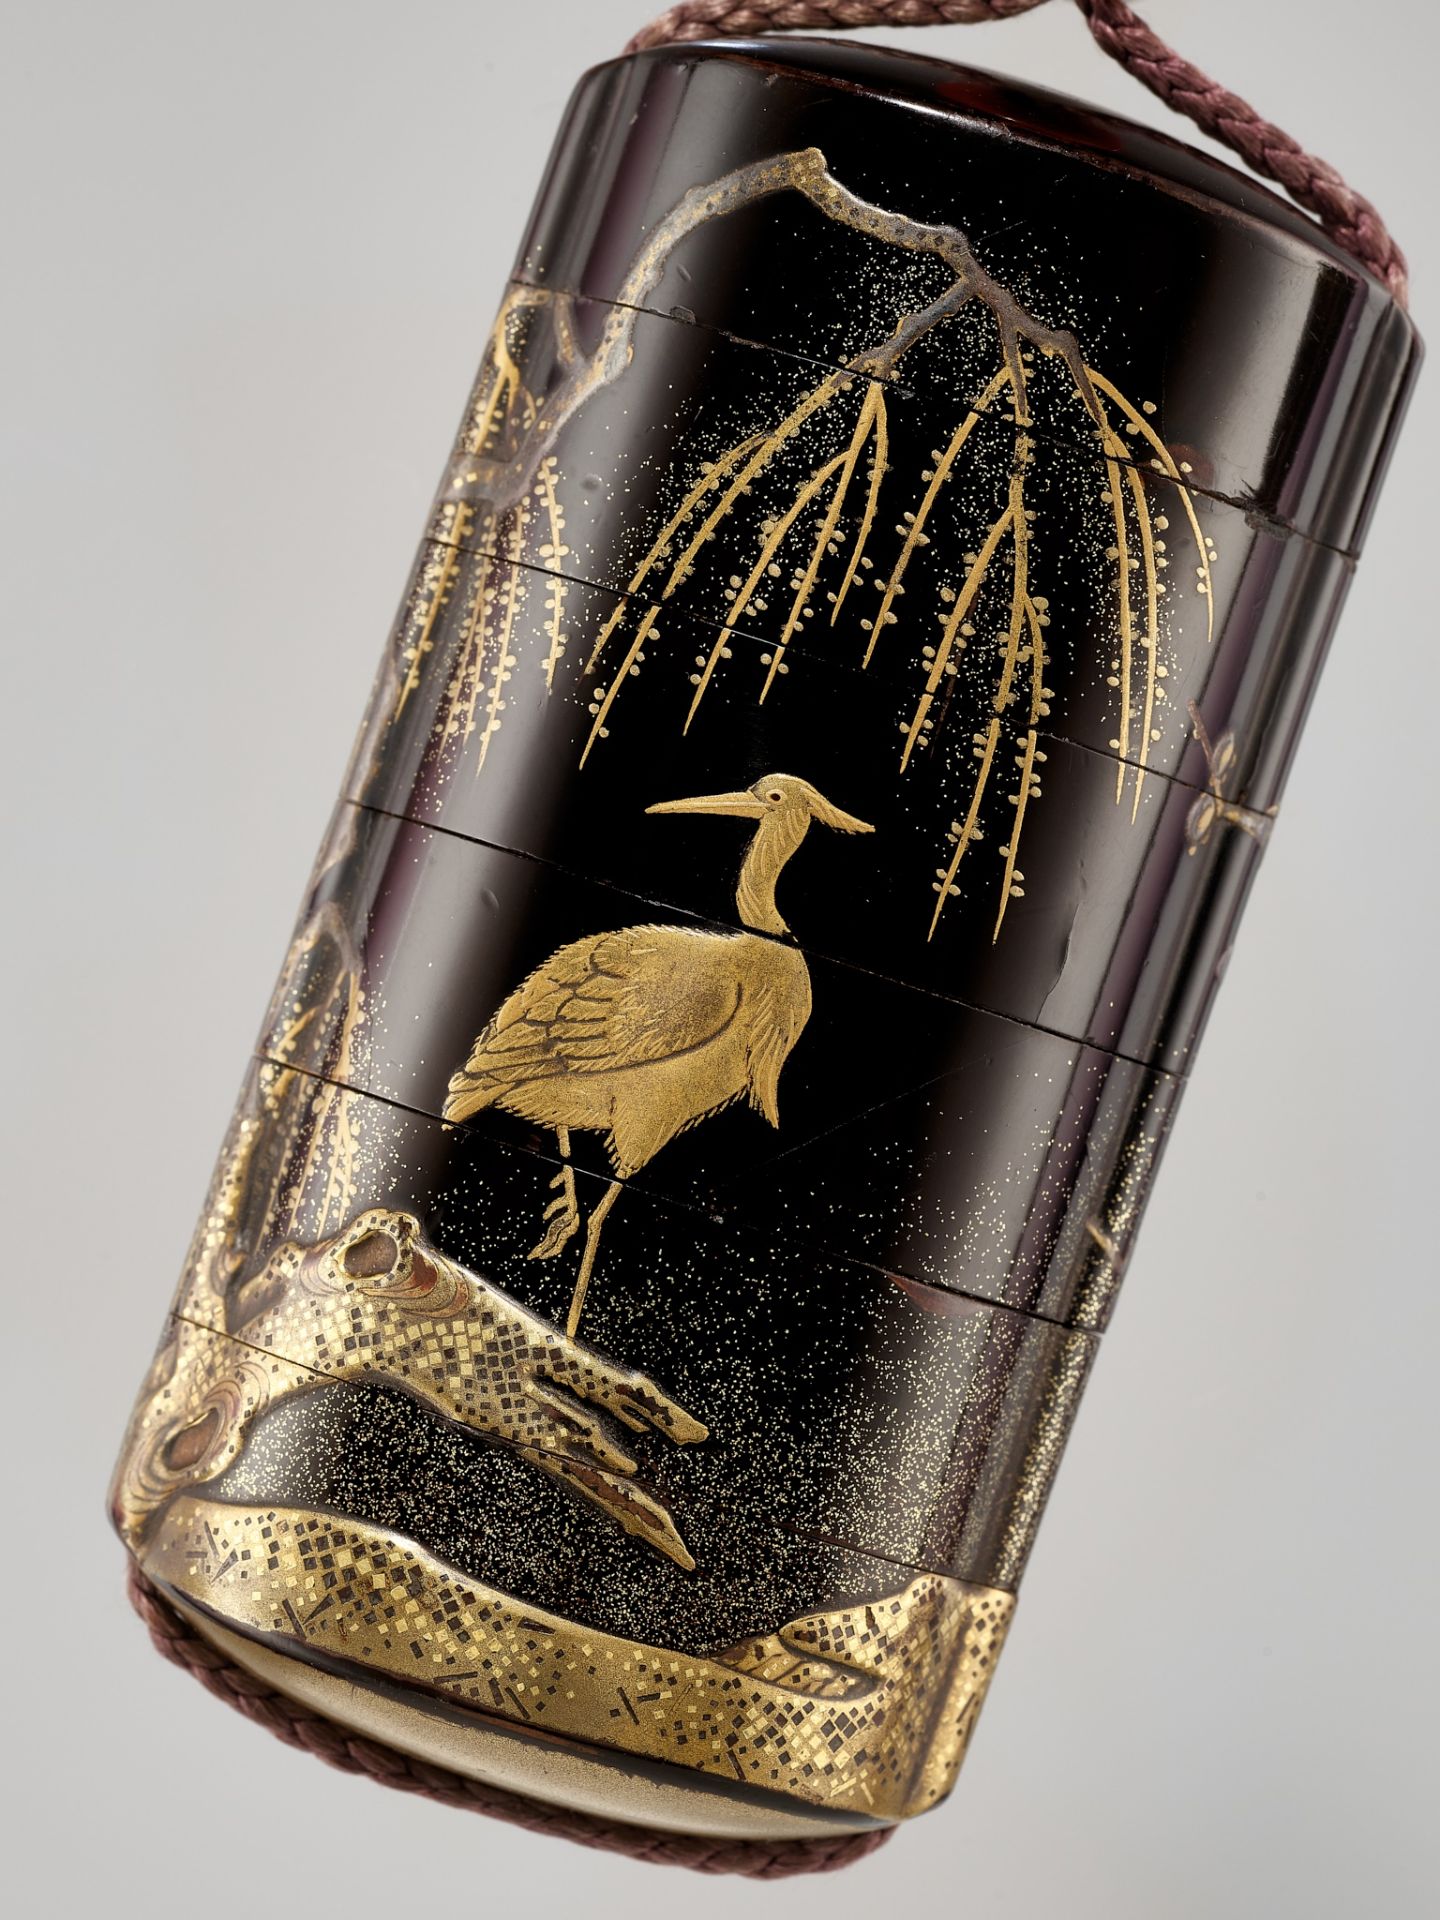 A FIVE-CASE LACQUER INRO DEPICTING A CHARMING WINTER SCENE - Image 4 of 8